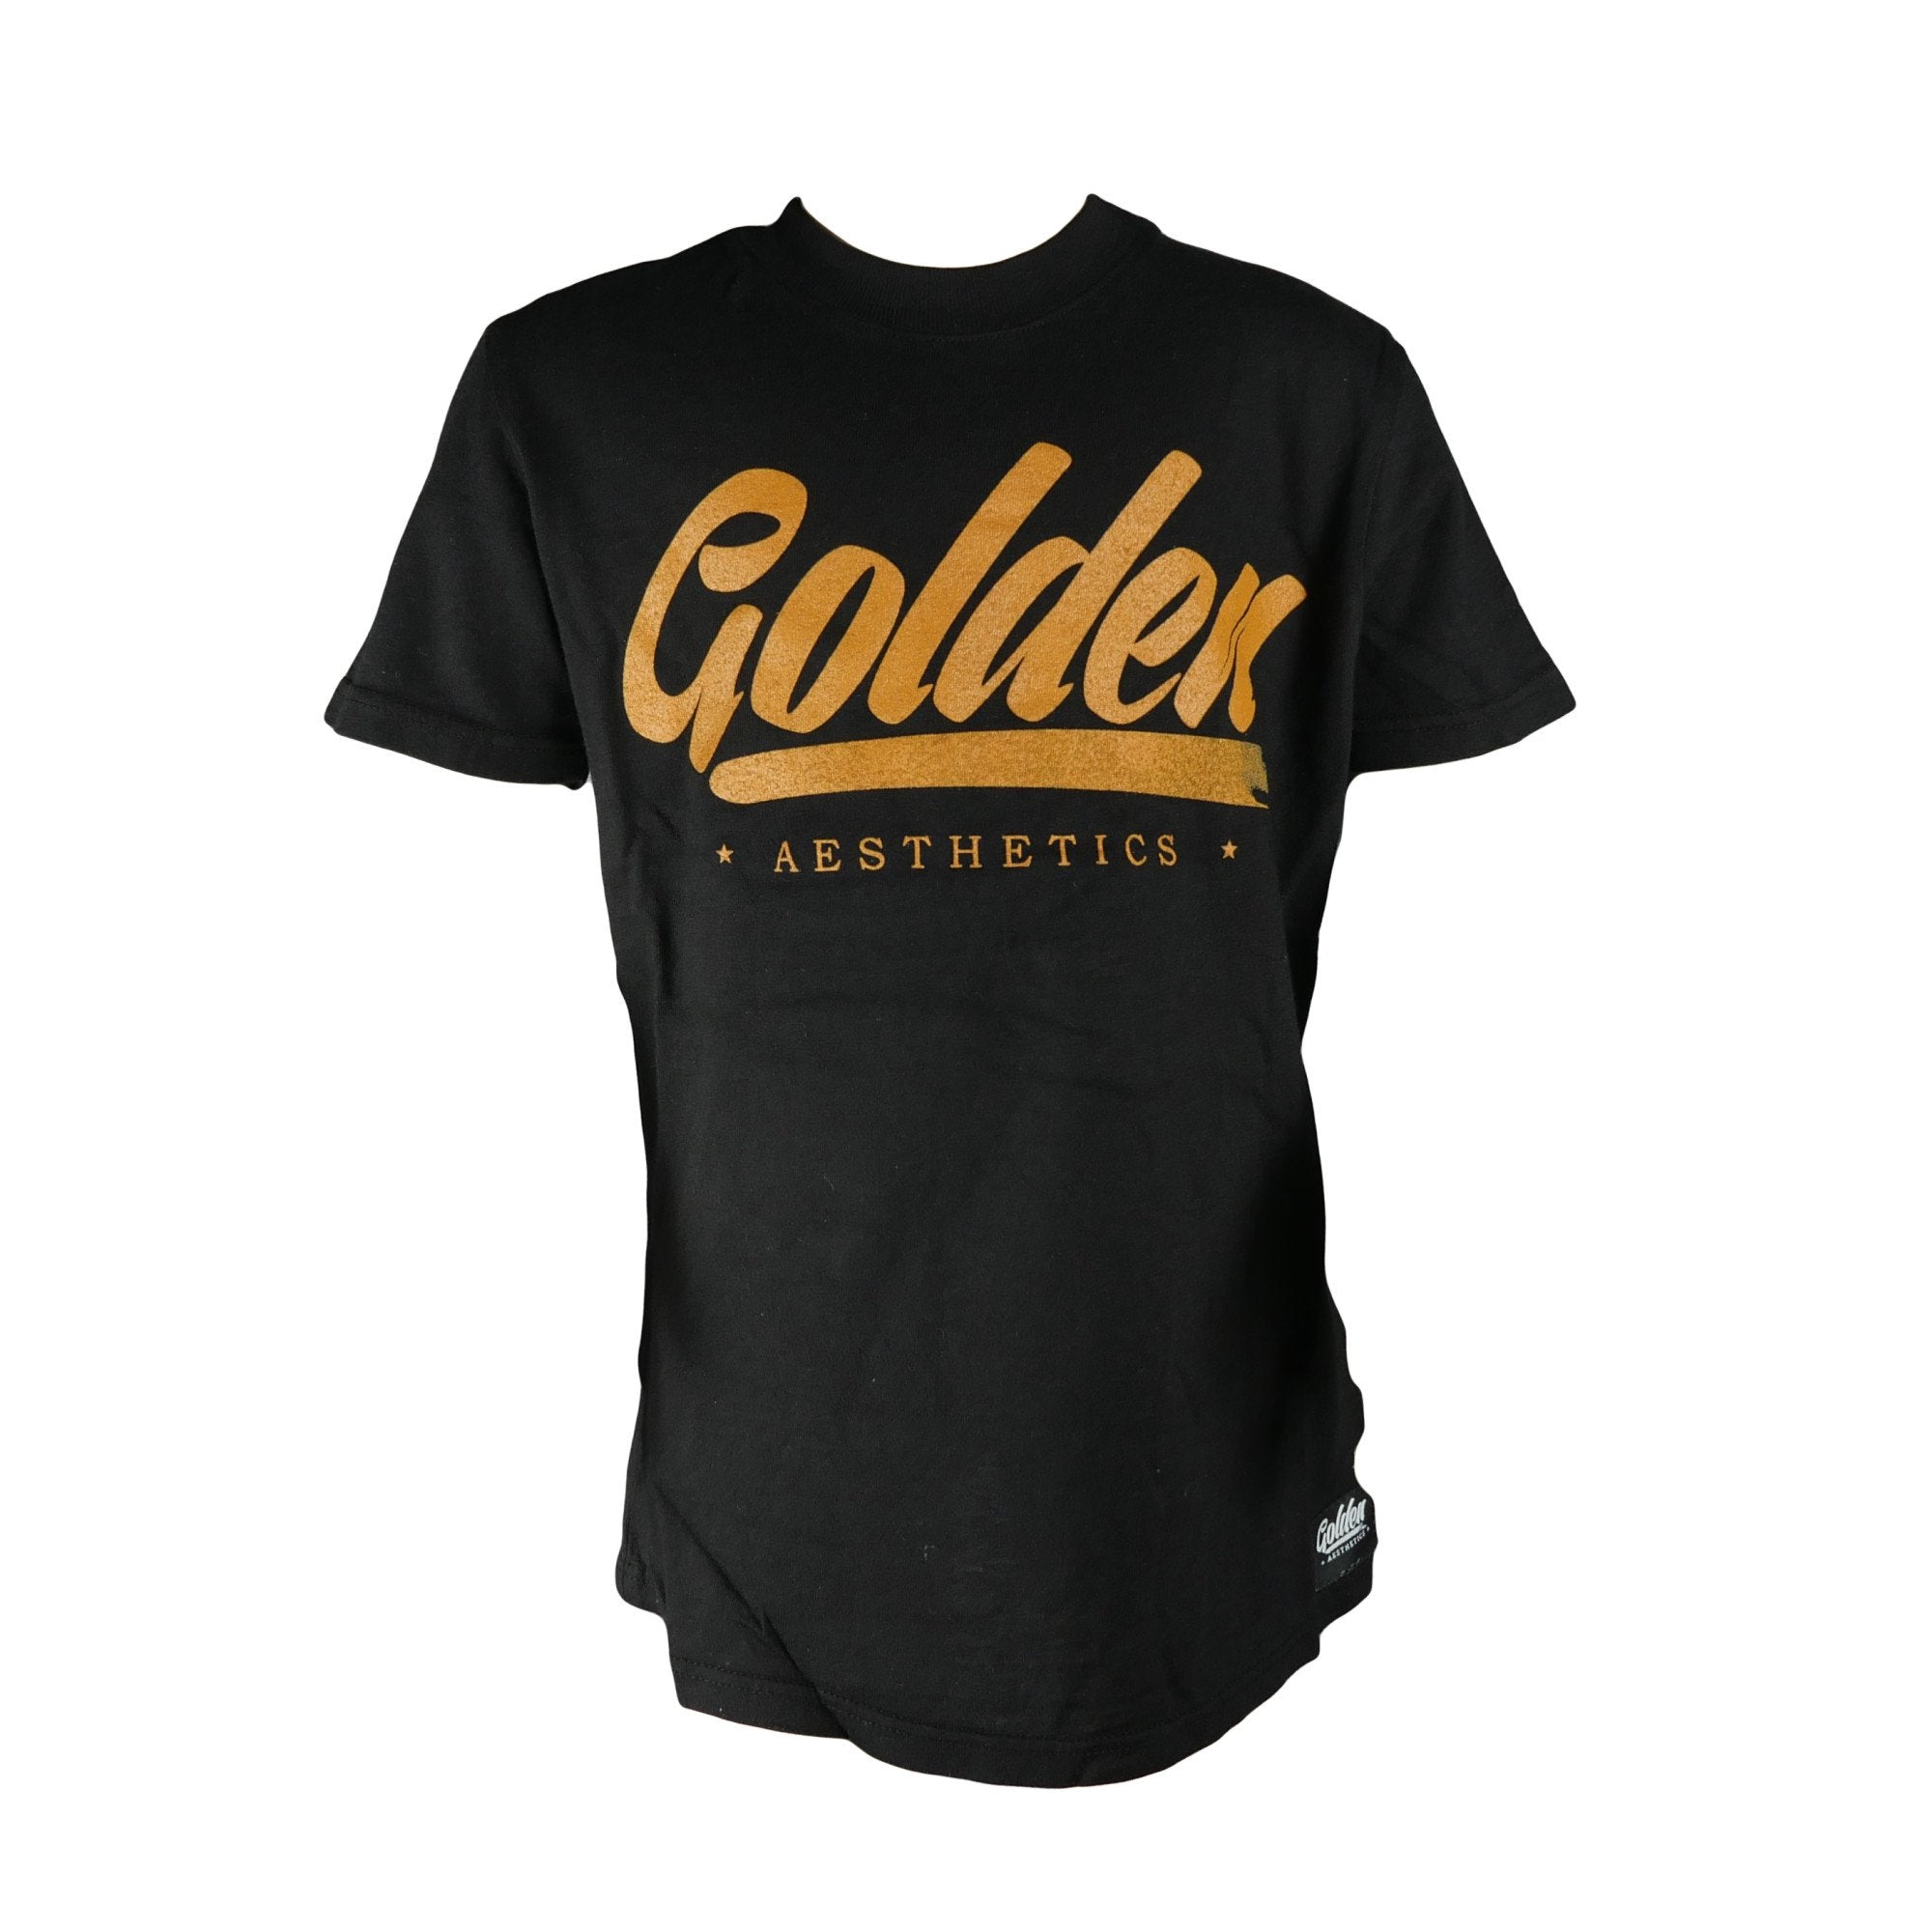 Kid's Collection T-Shirt - Charcoal Black - Golden Aesthetics